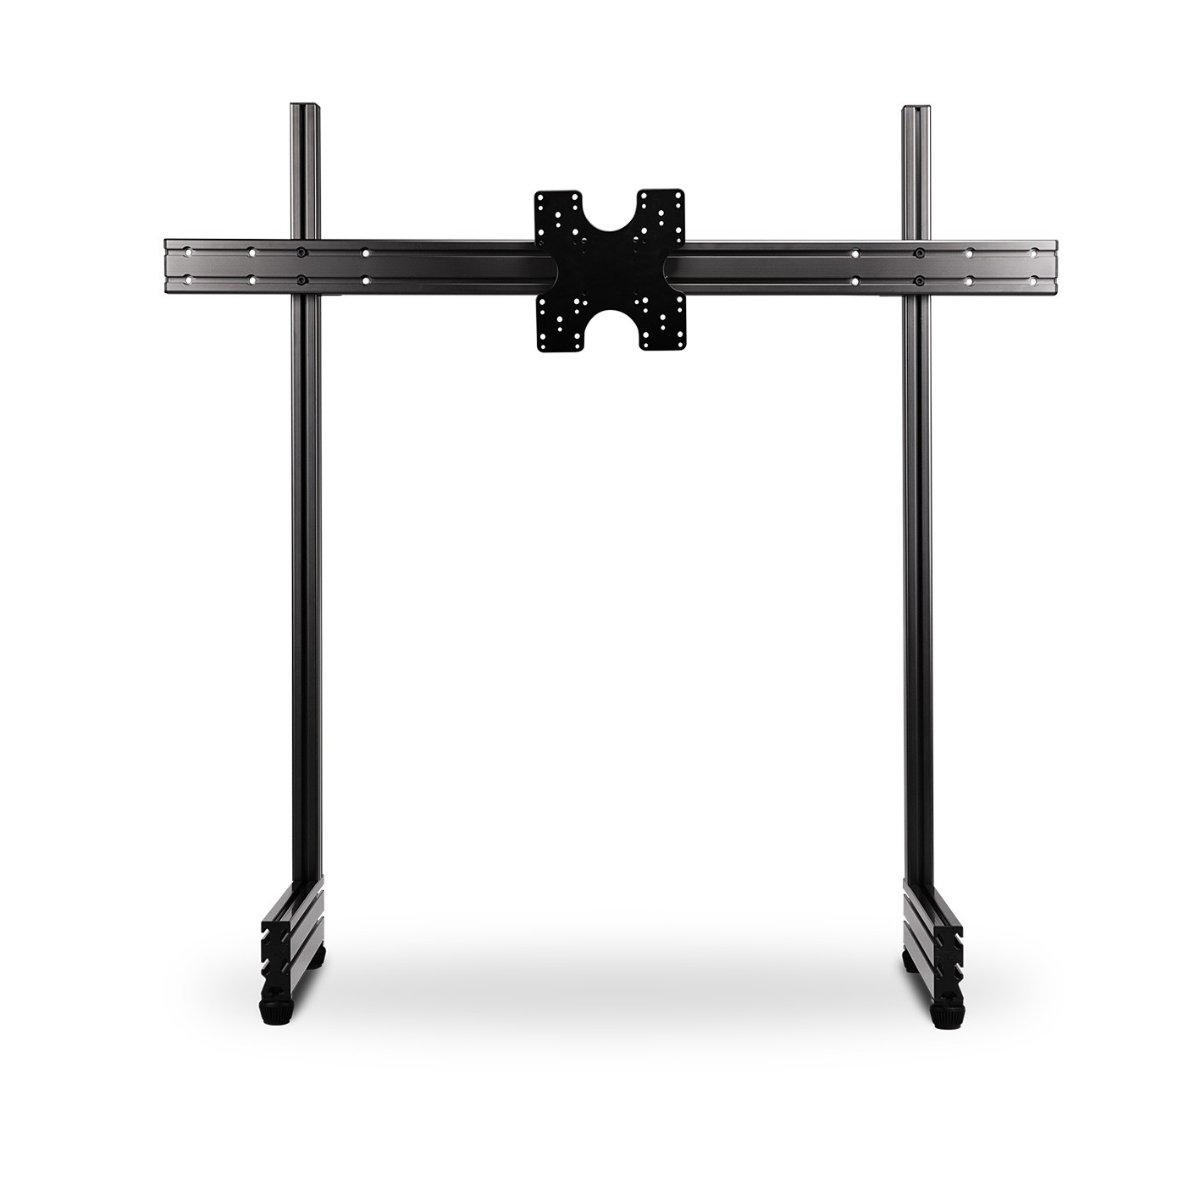 STANDING ELITE NLR-E005 LEVEL MONITOR STAND NEXT SINGLE RACING FREE